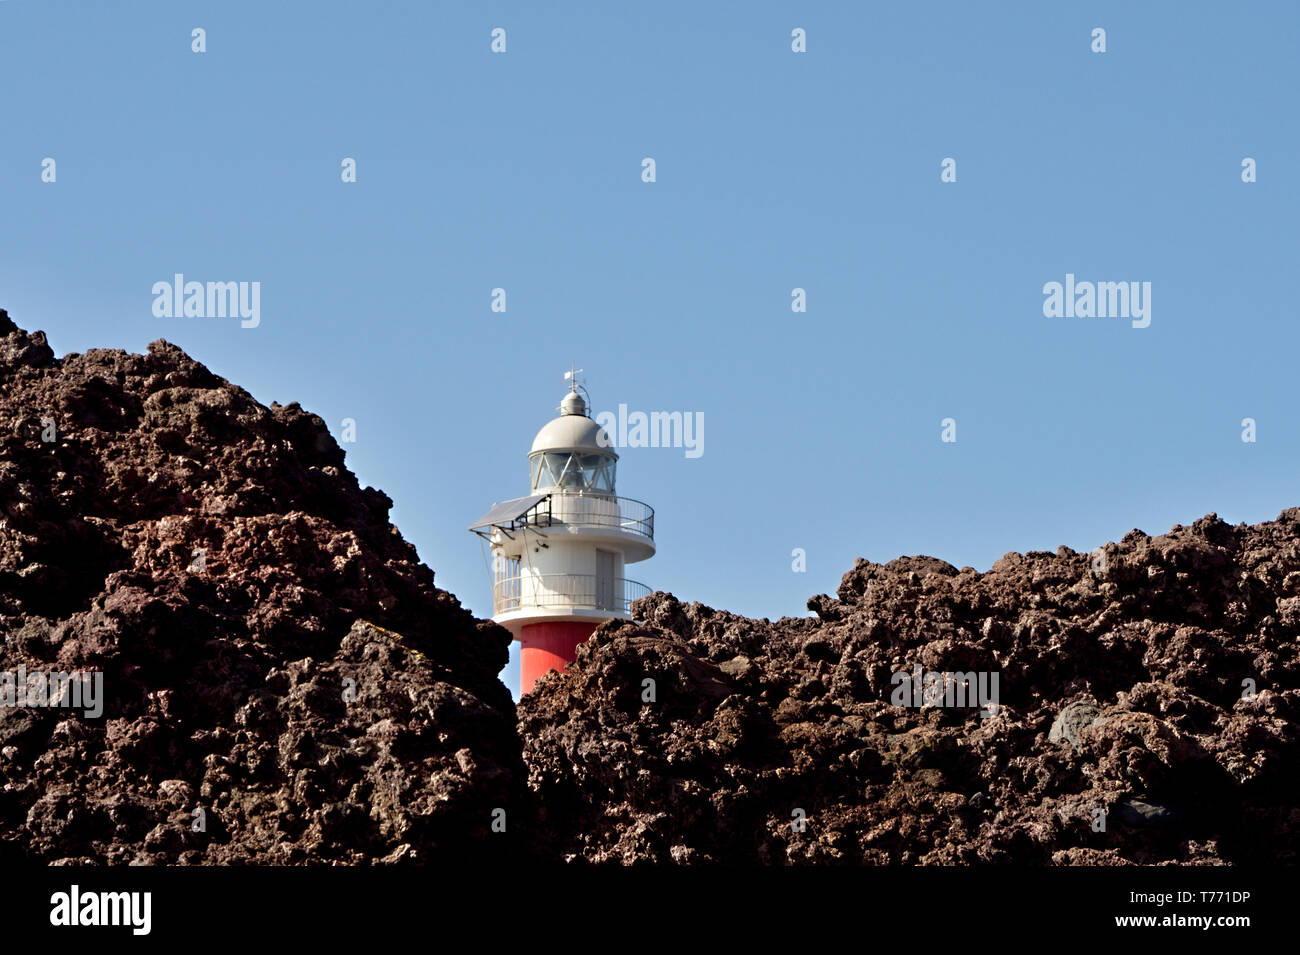 The red-white lighthouse of the point of the Teno Mountains stands in a volcanic landscape, the 'Punta de Teno'  Loose volcanic rock Stock Photo